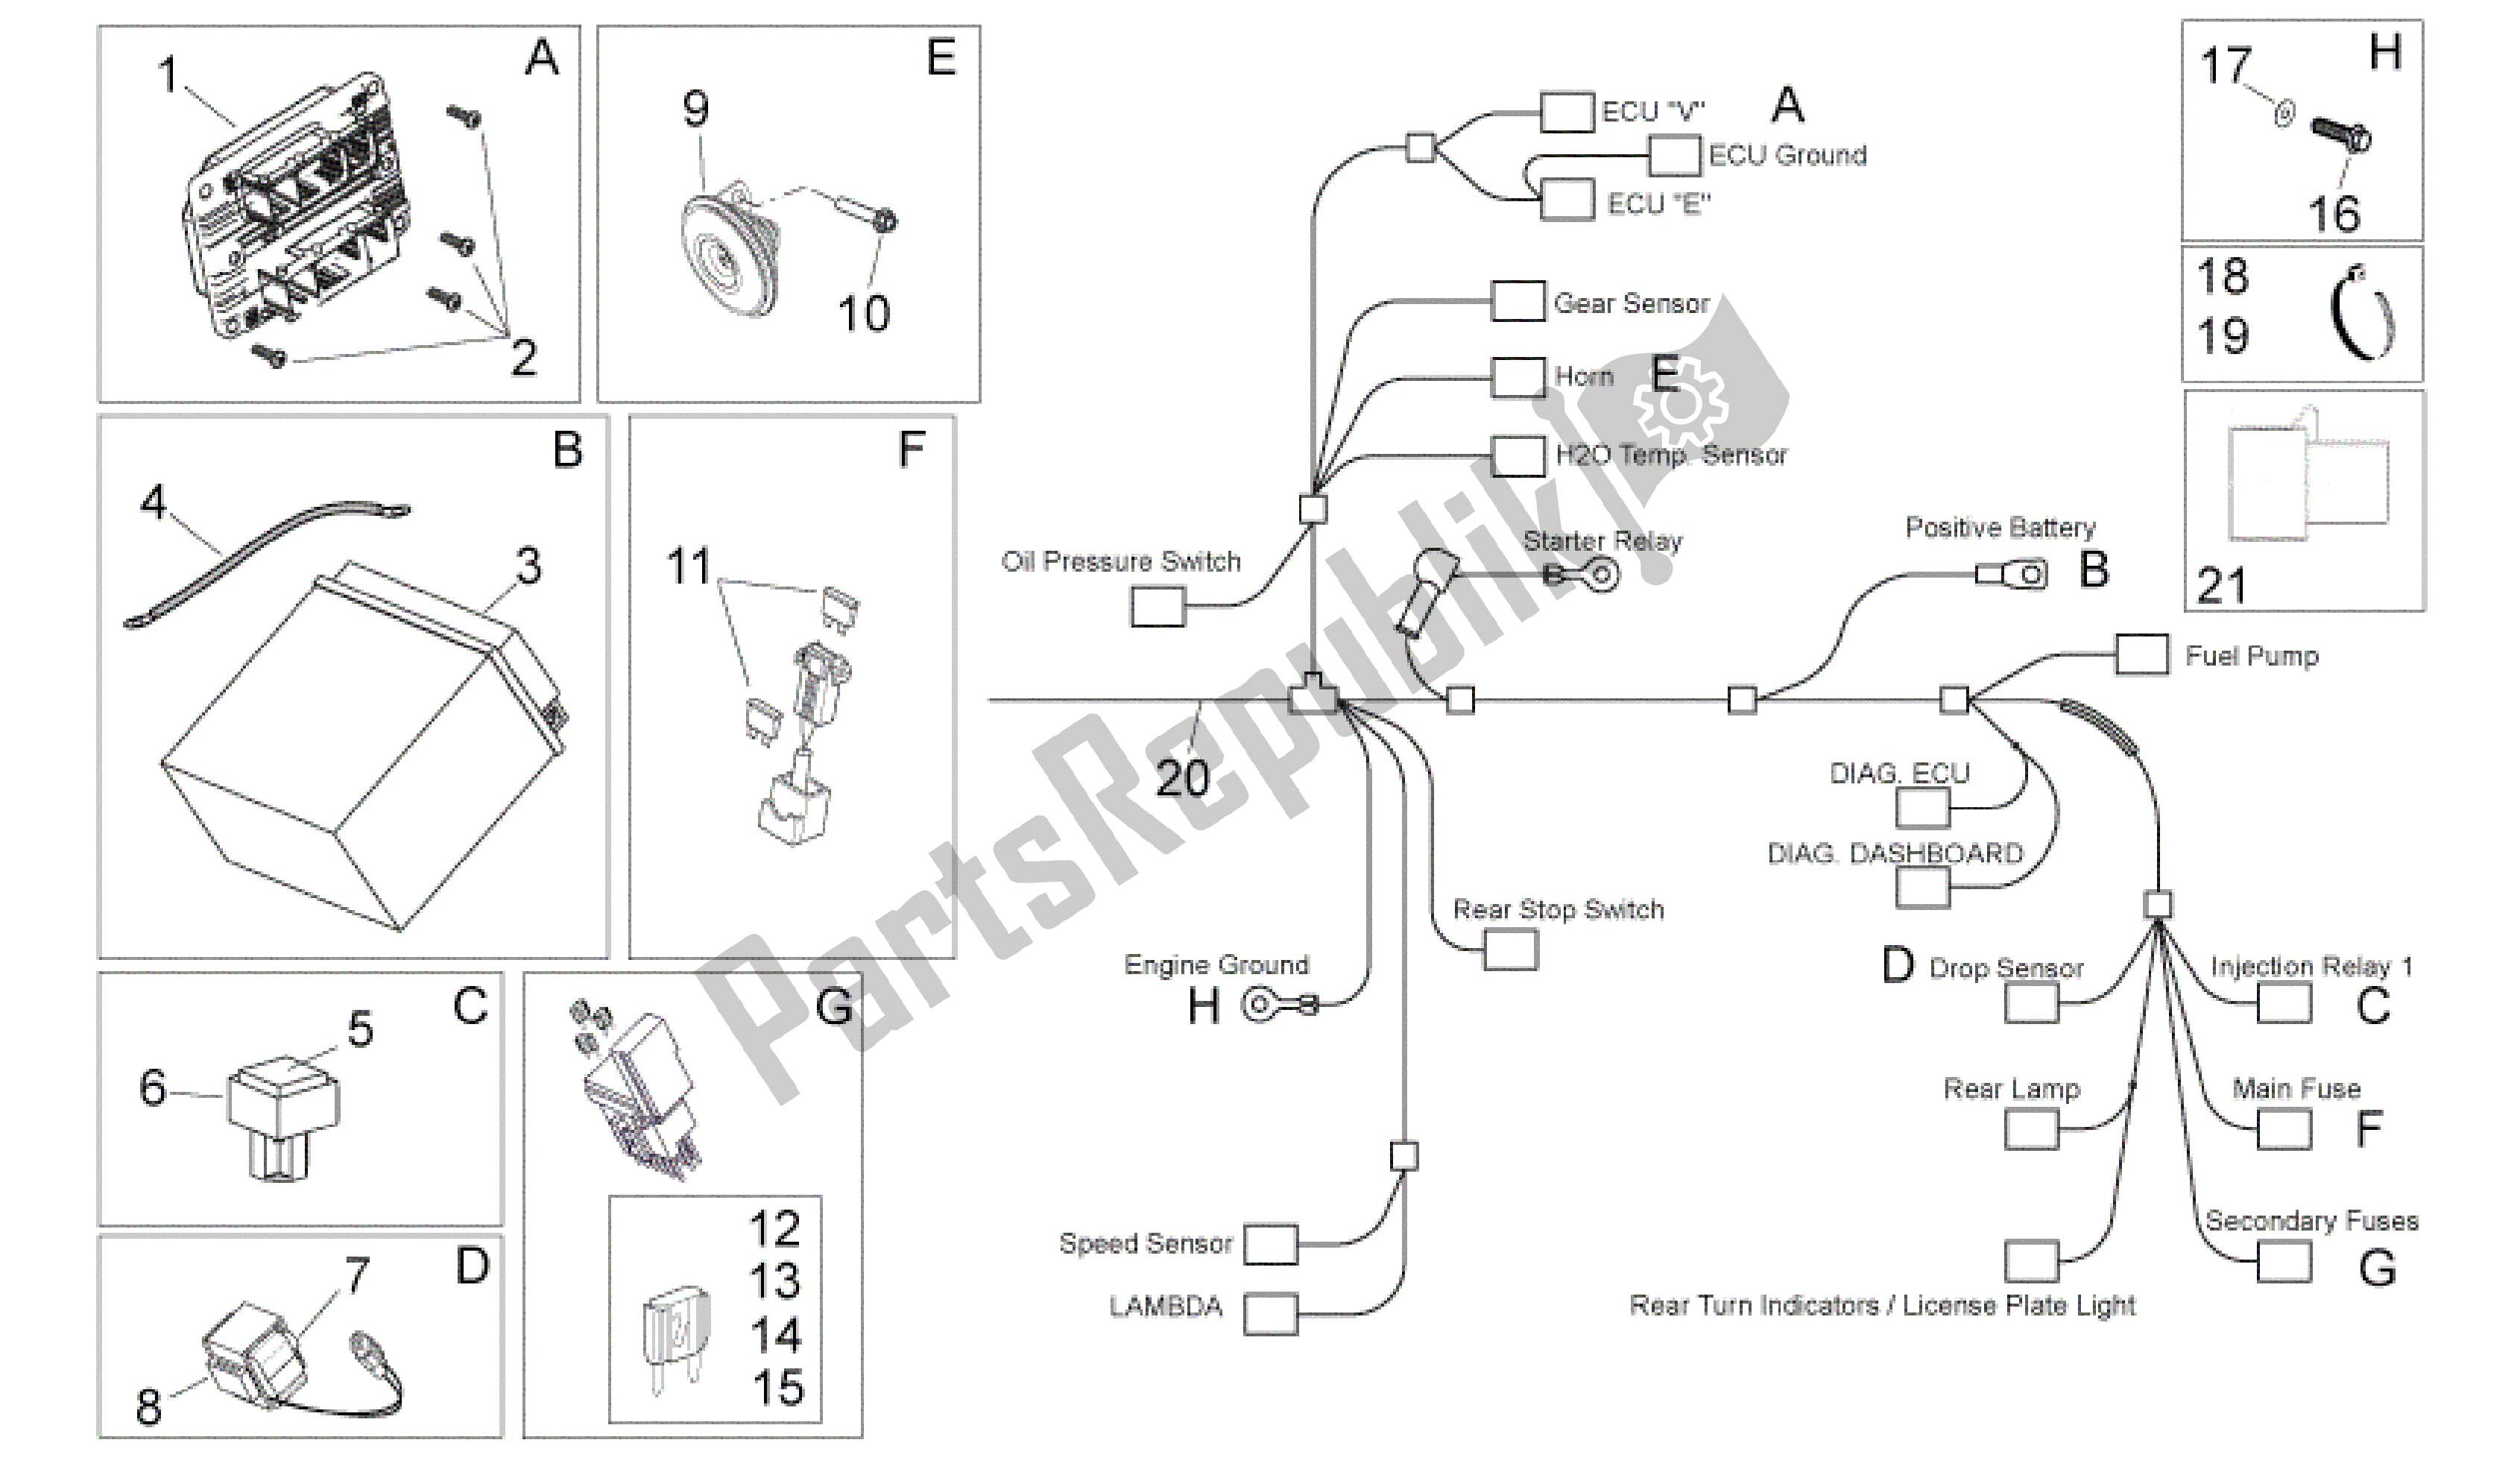 All parts for the Electrical System Ii of the Aprilia Shiver 750 2007 - 2009